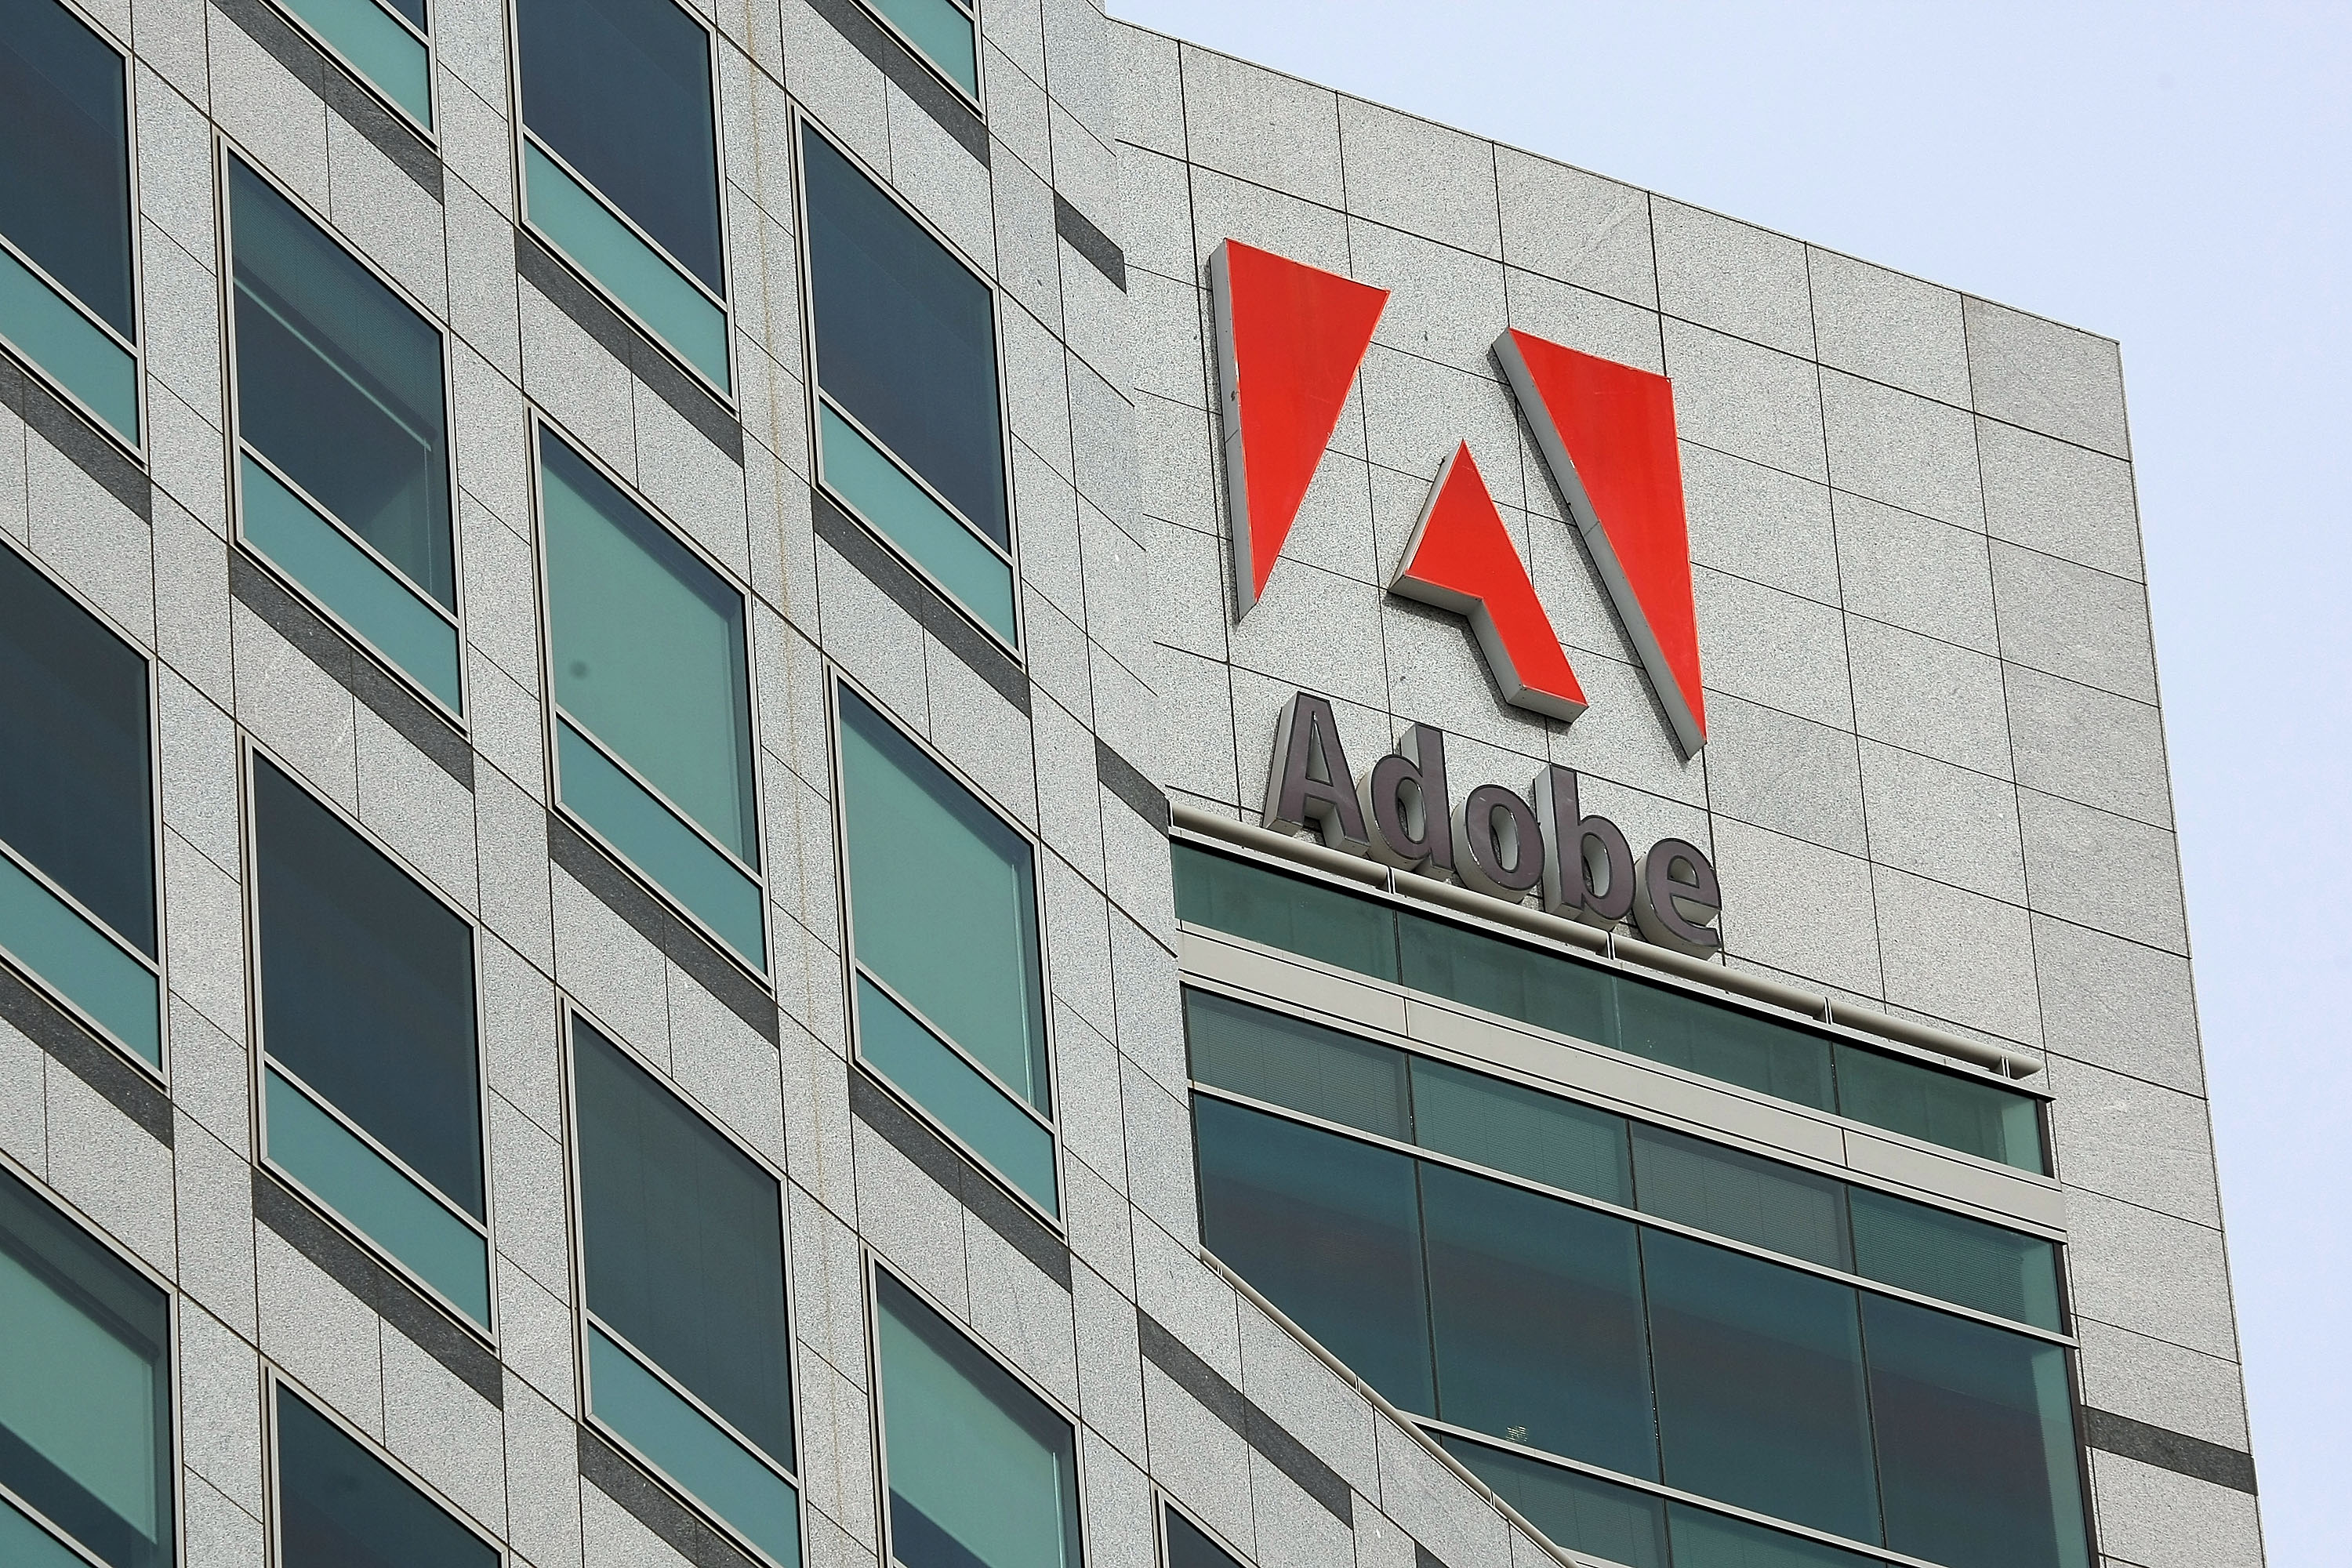 The Adobe logo is displayed on the side of the Adobe Systems headquarters January 15, 2010 in San Jose, California. Adobe Systems has added 20 new wind turbines to their rooftops in an attempt to harness wind energy to help power their offices. (Justin Sullivan&mdash;Getty Images)